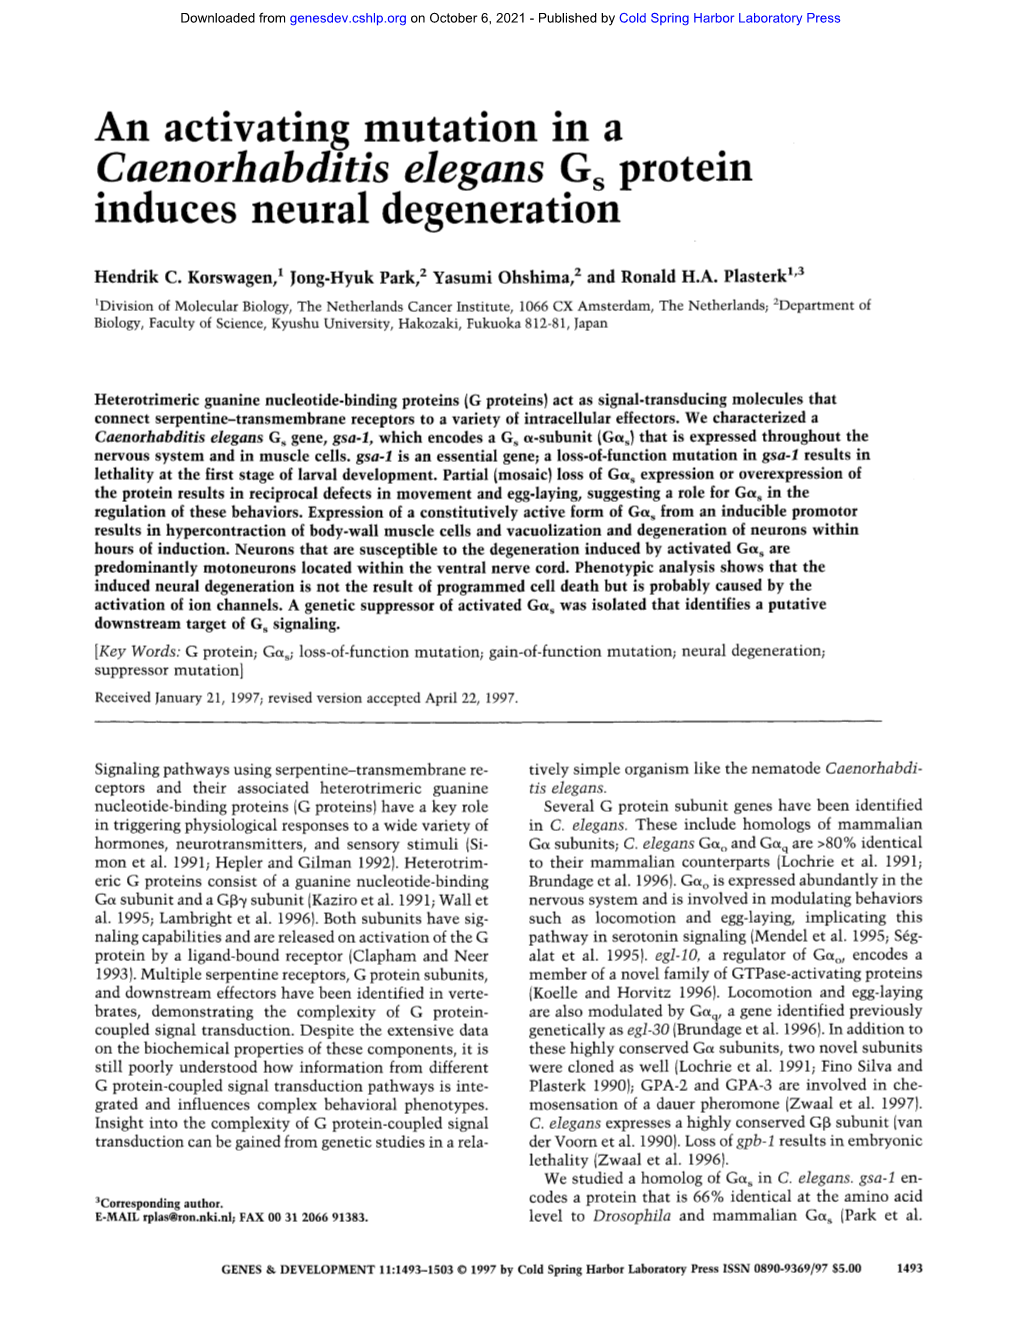 An Activating Mutation S Protein Induces Neural Degeneration